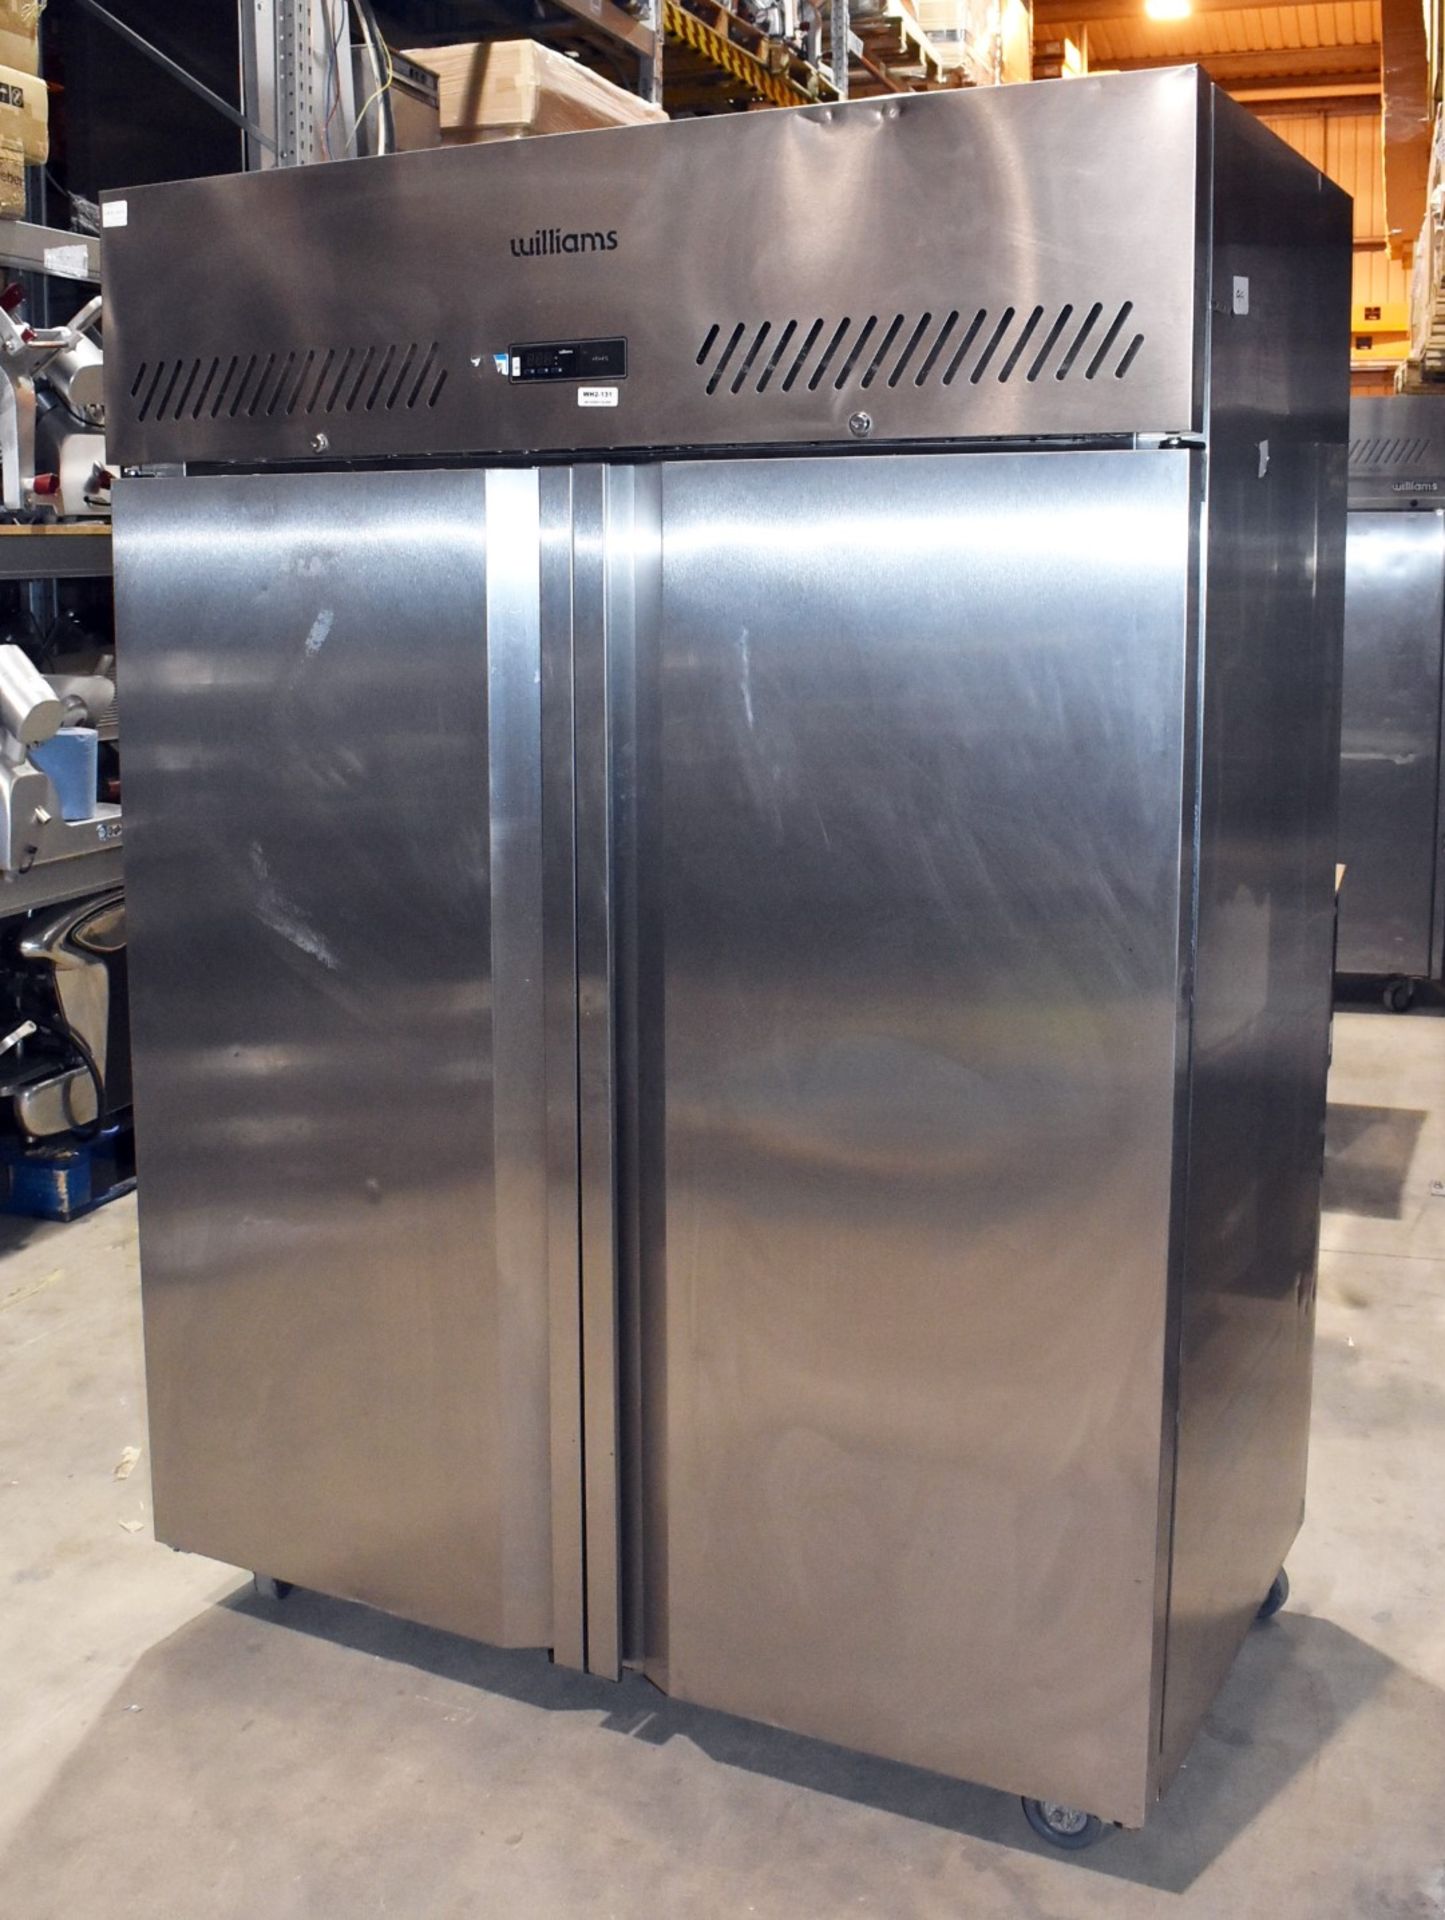 1 x Williams Upright Double Door Refrigerator With Stainless Steel Exterior - Model HS2SA - Recently - Image 2 of 20